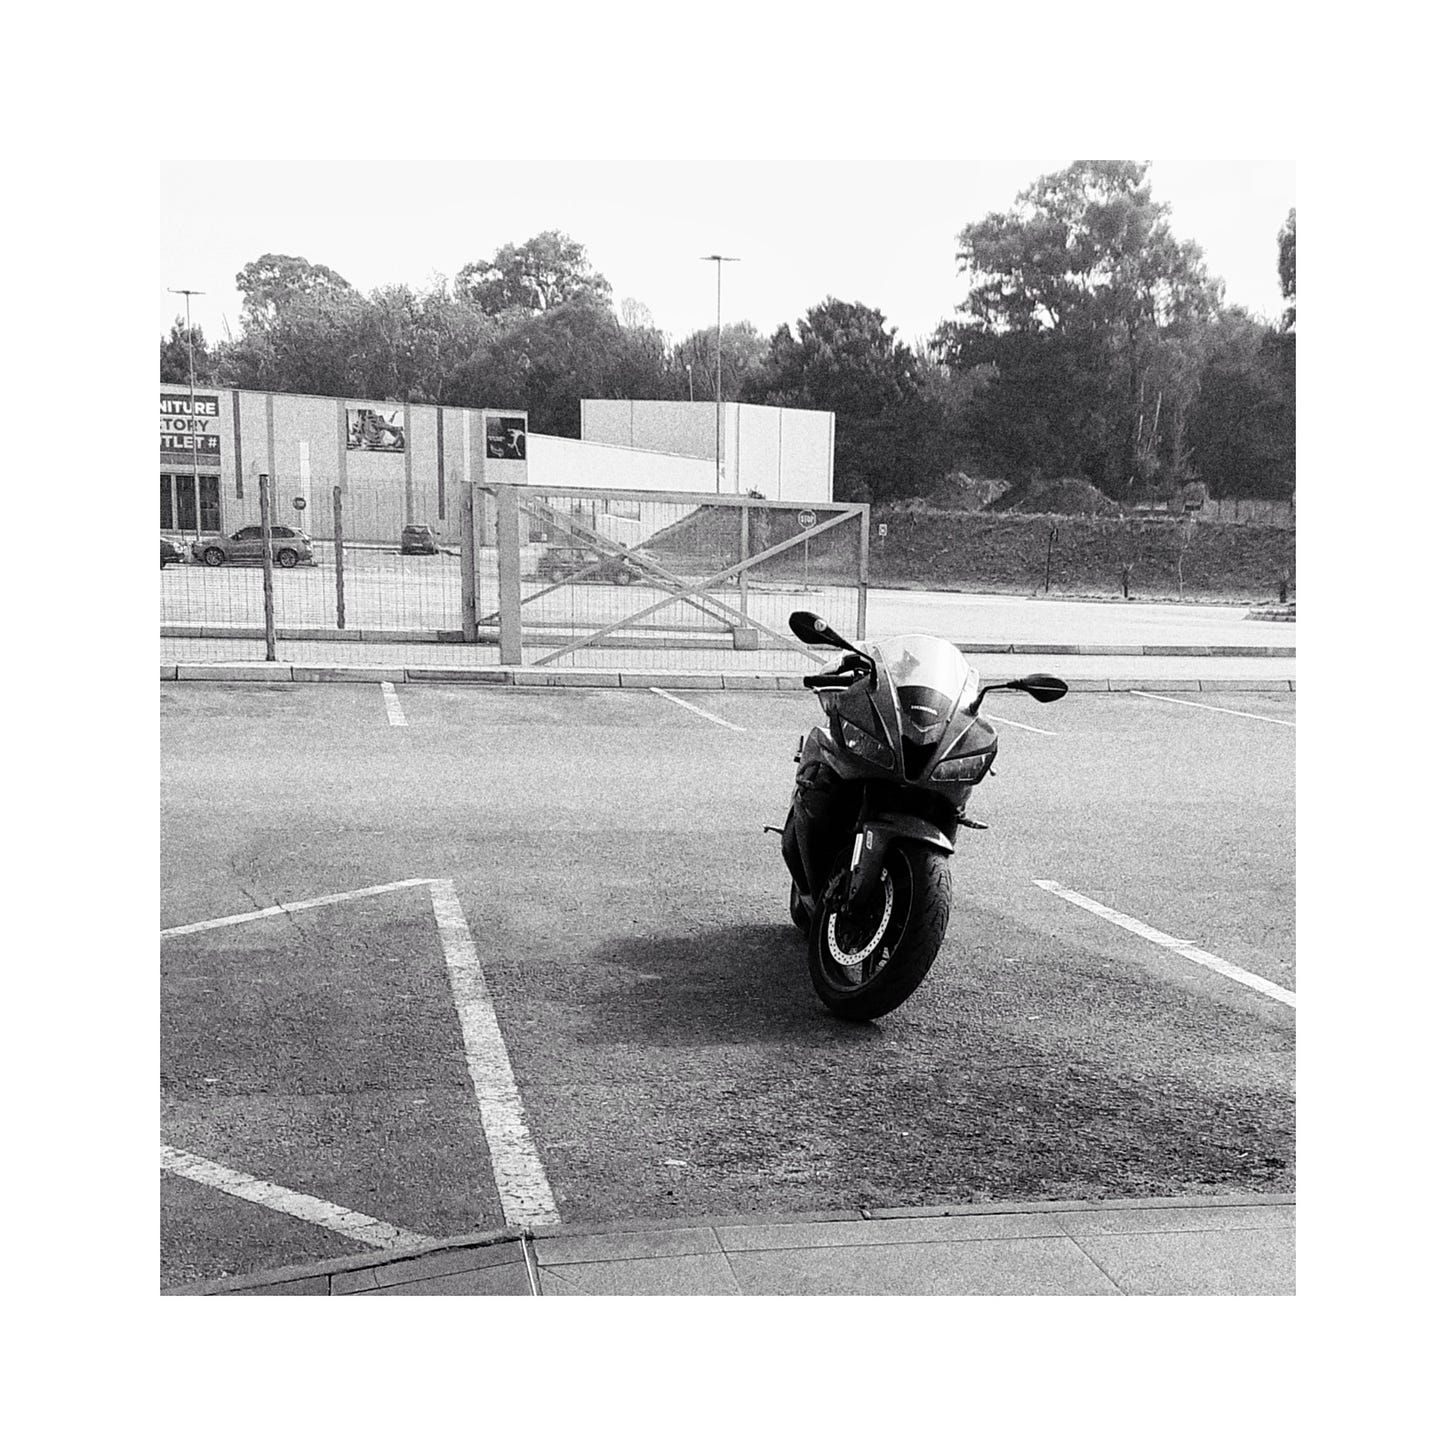 A motorcycle standing in a parking lot